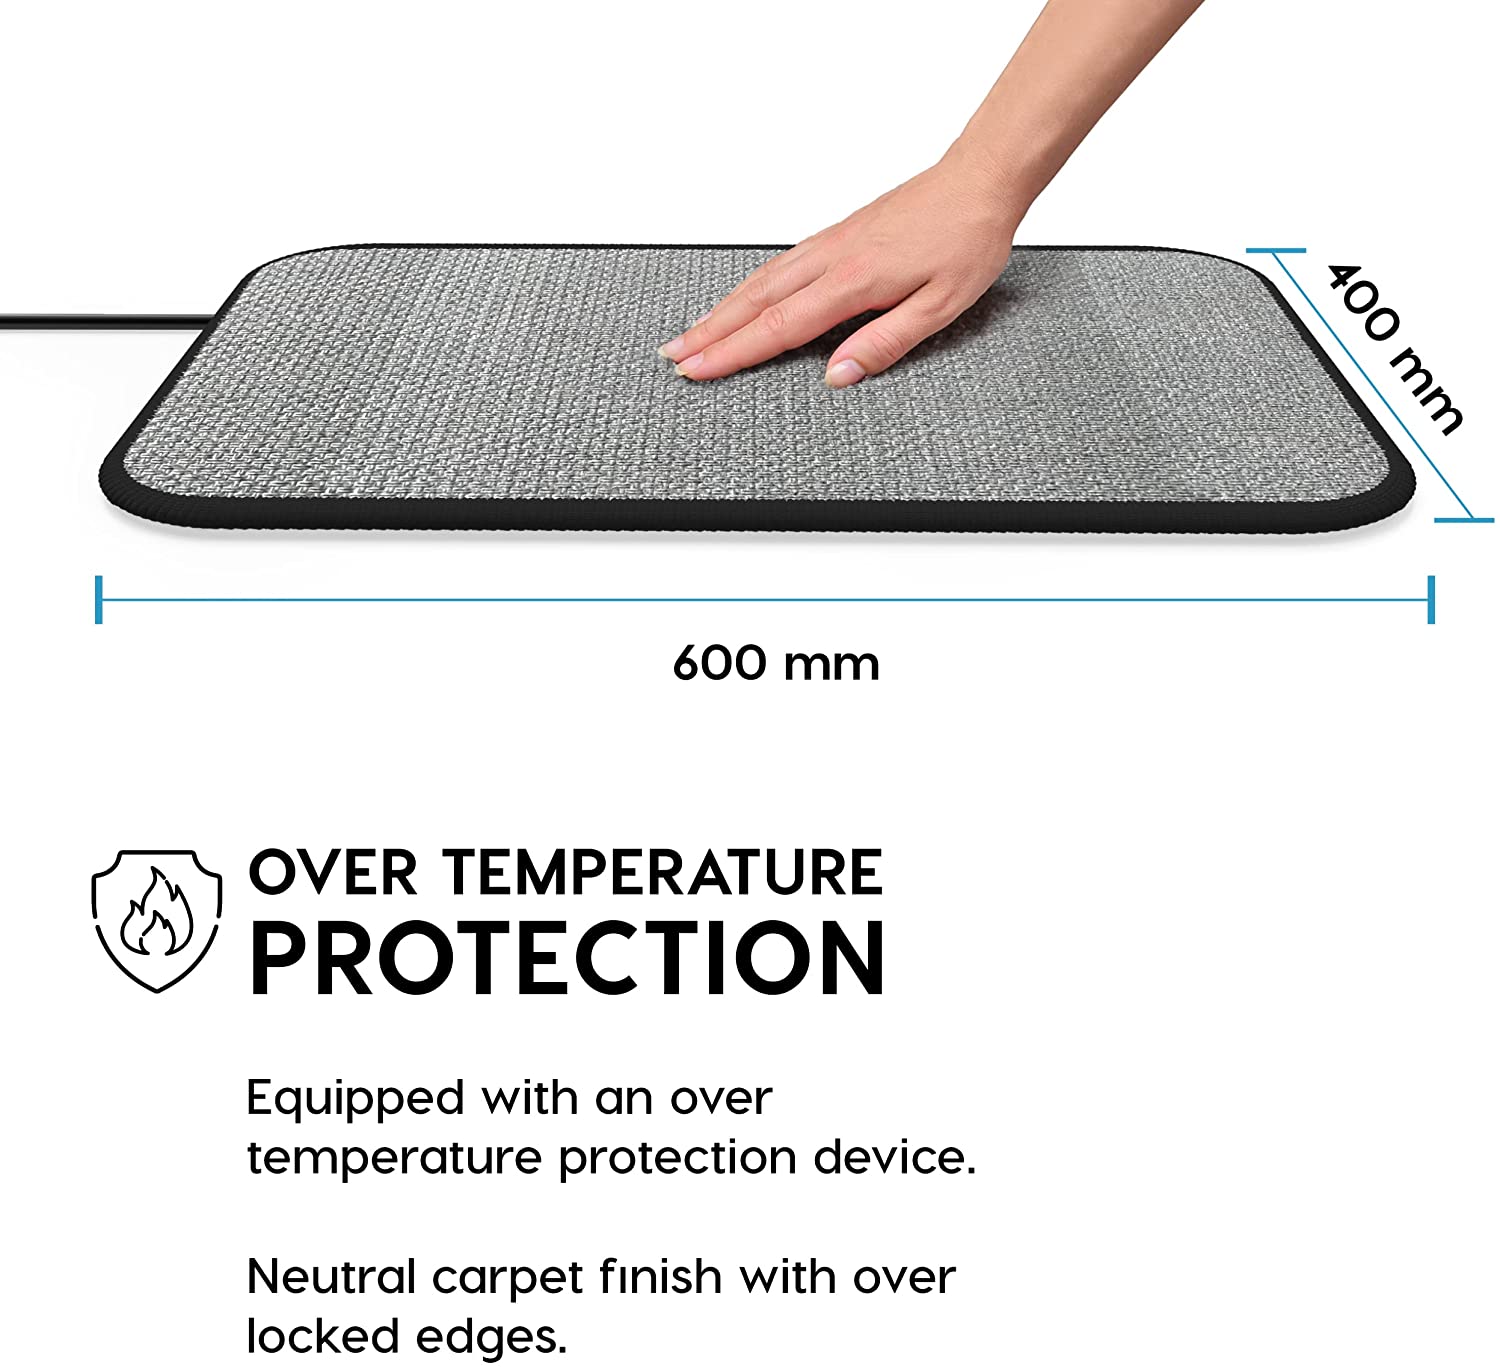 EconoHome Electric Heated Foot Warmer Mat For Office Or Home